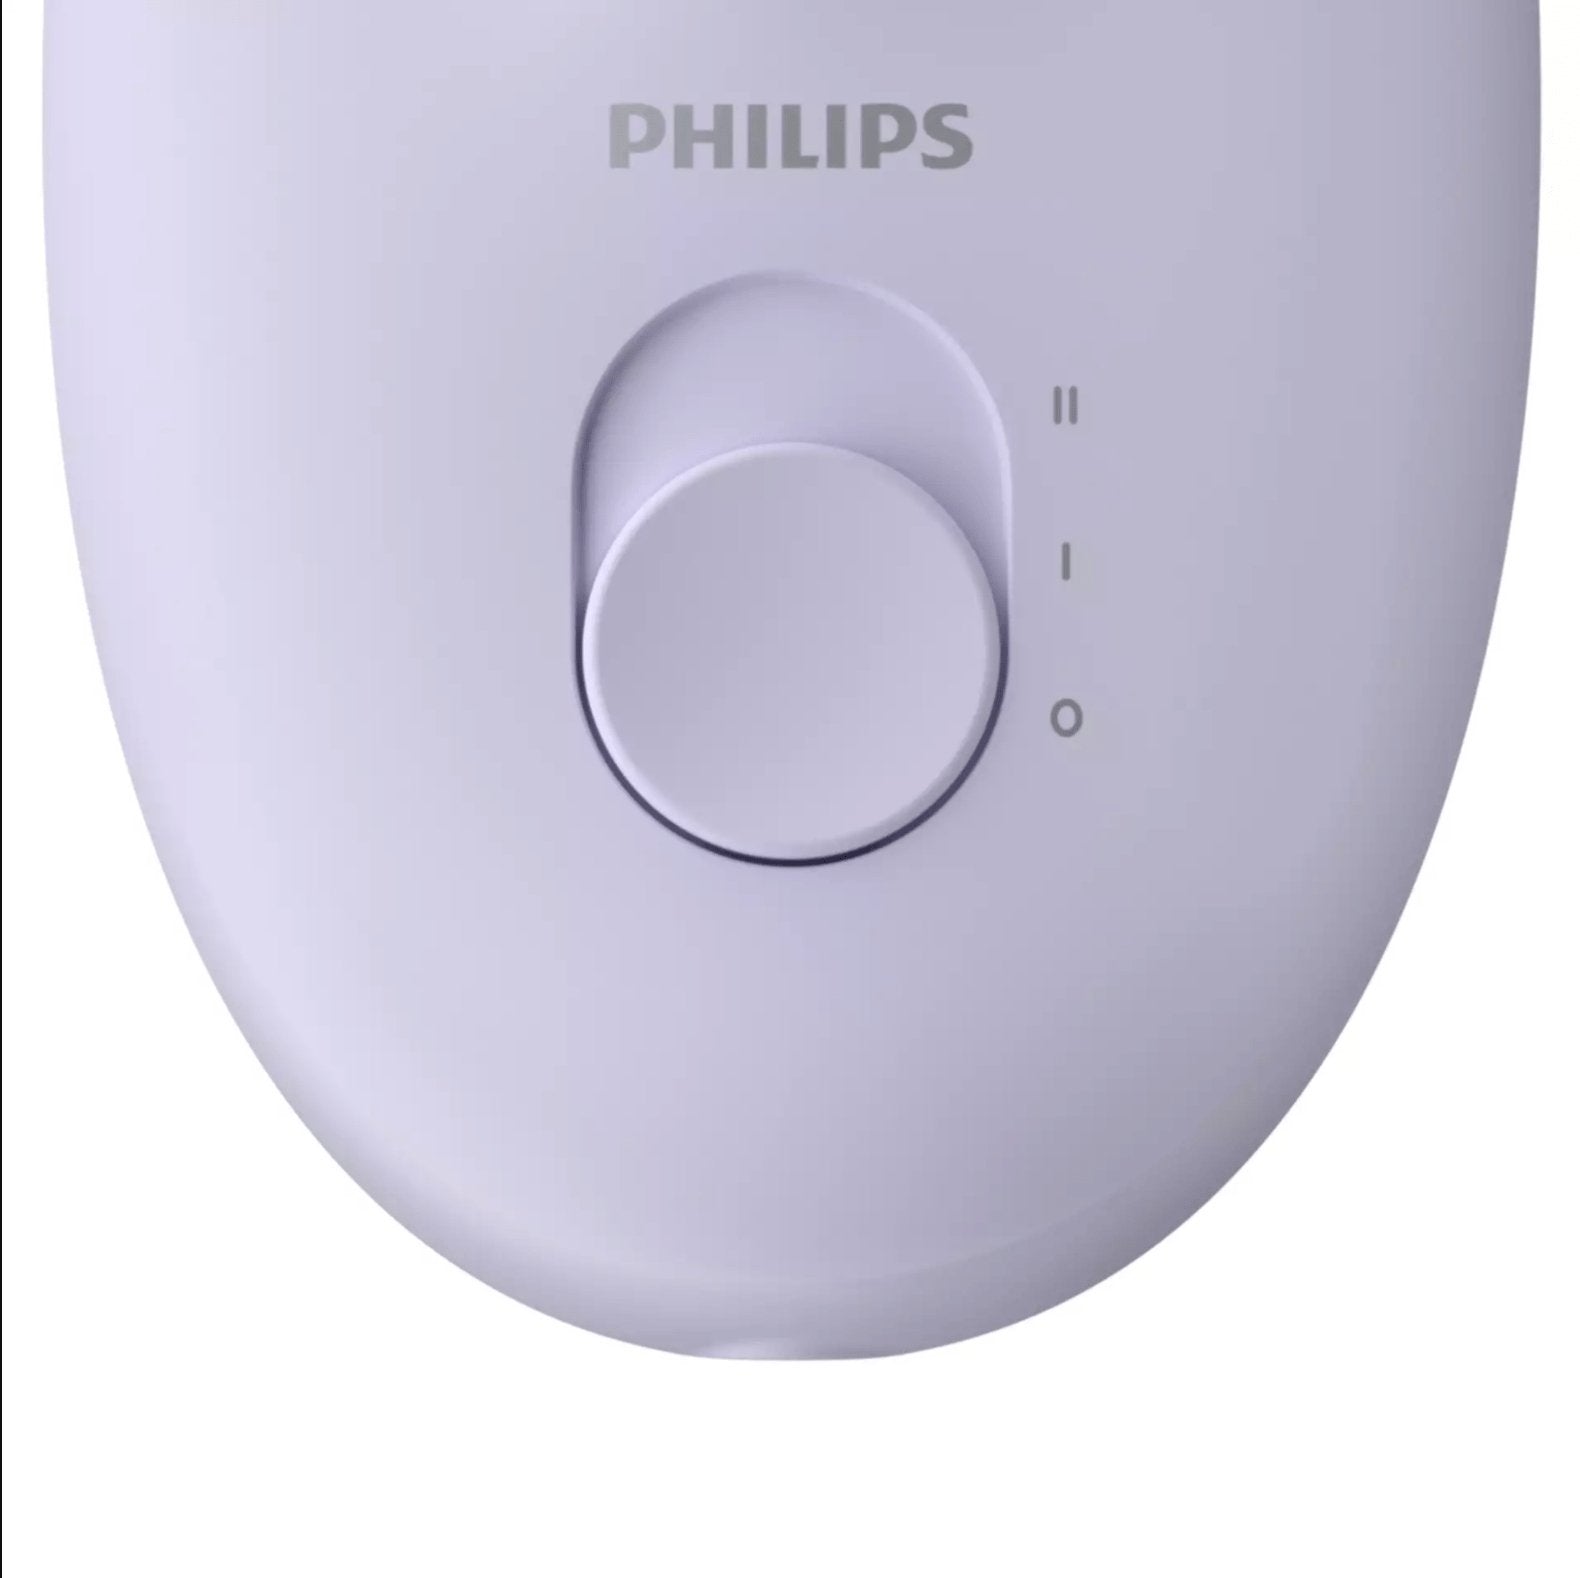 Philips BRE275/00 Satinelle Essential Corded Compact Epilator w/ 4 Accessories - Healthxpress.ie